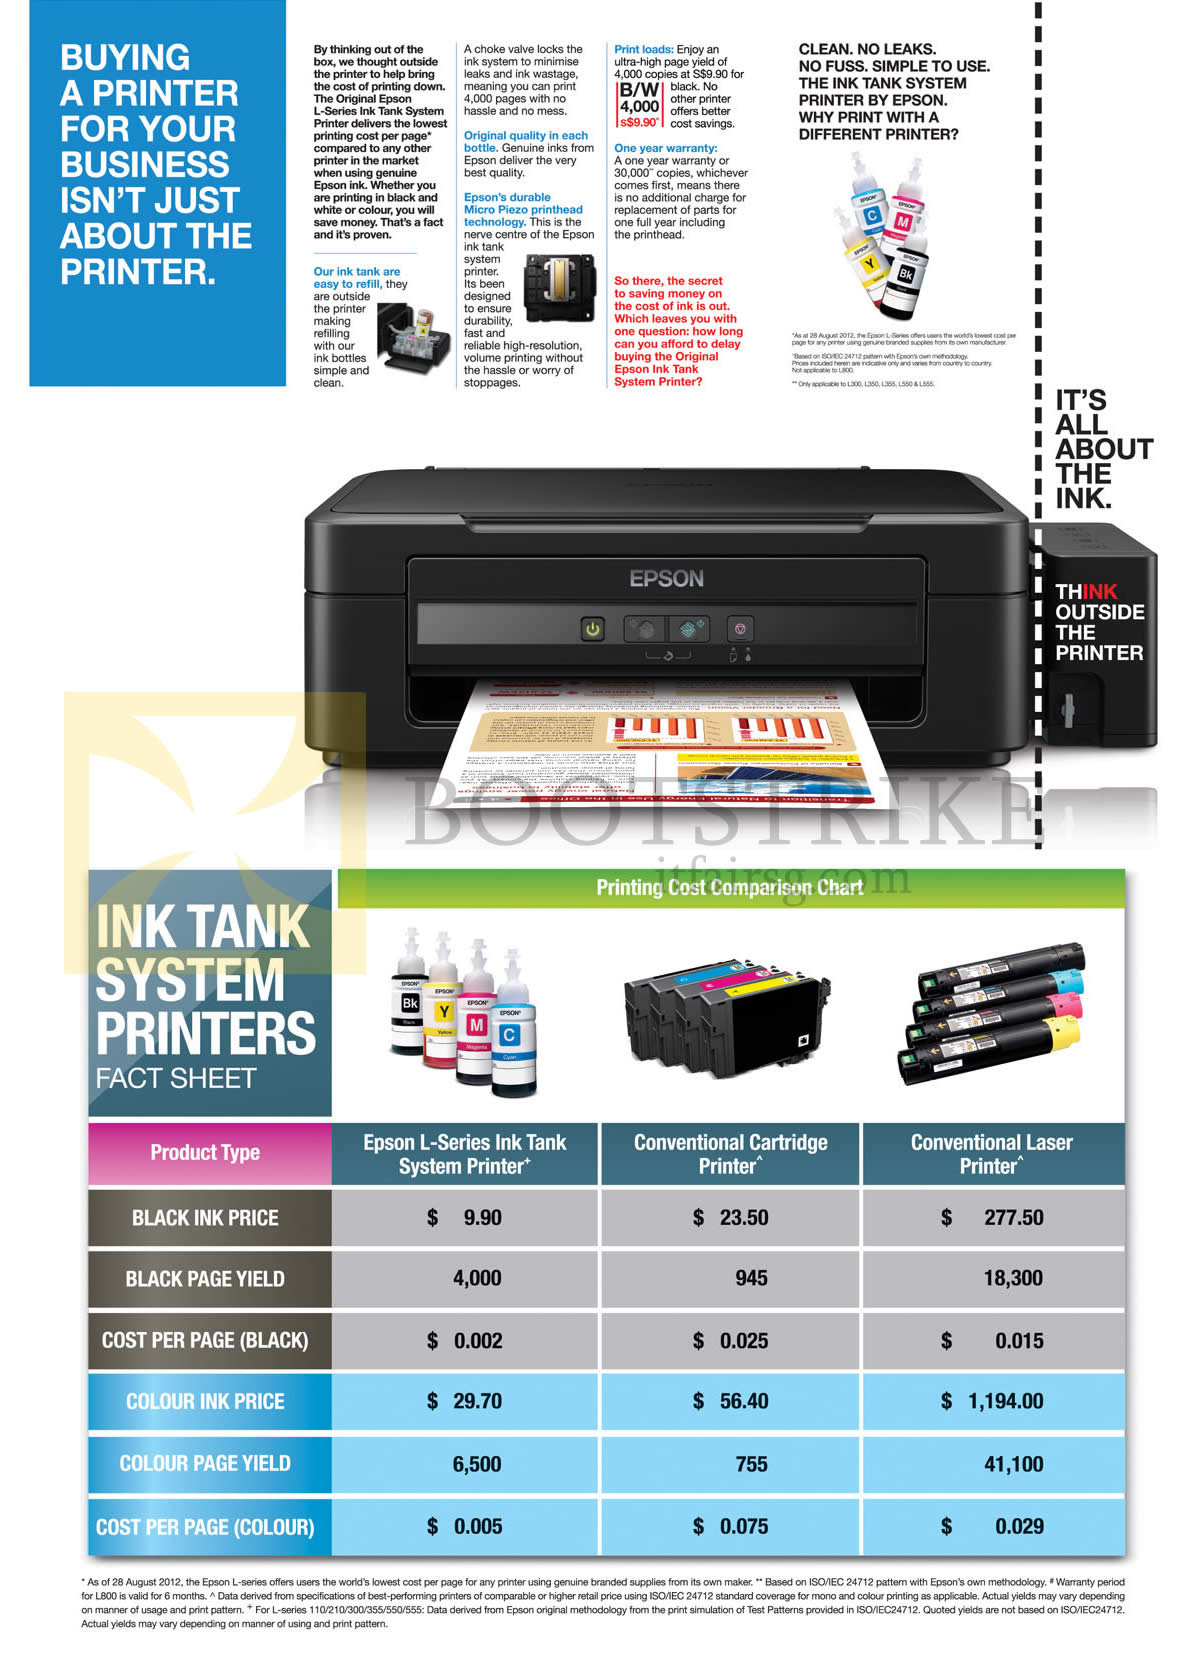 Epson Ink Tank System Printers Printing Cost Comparison ...